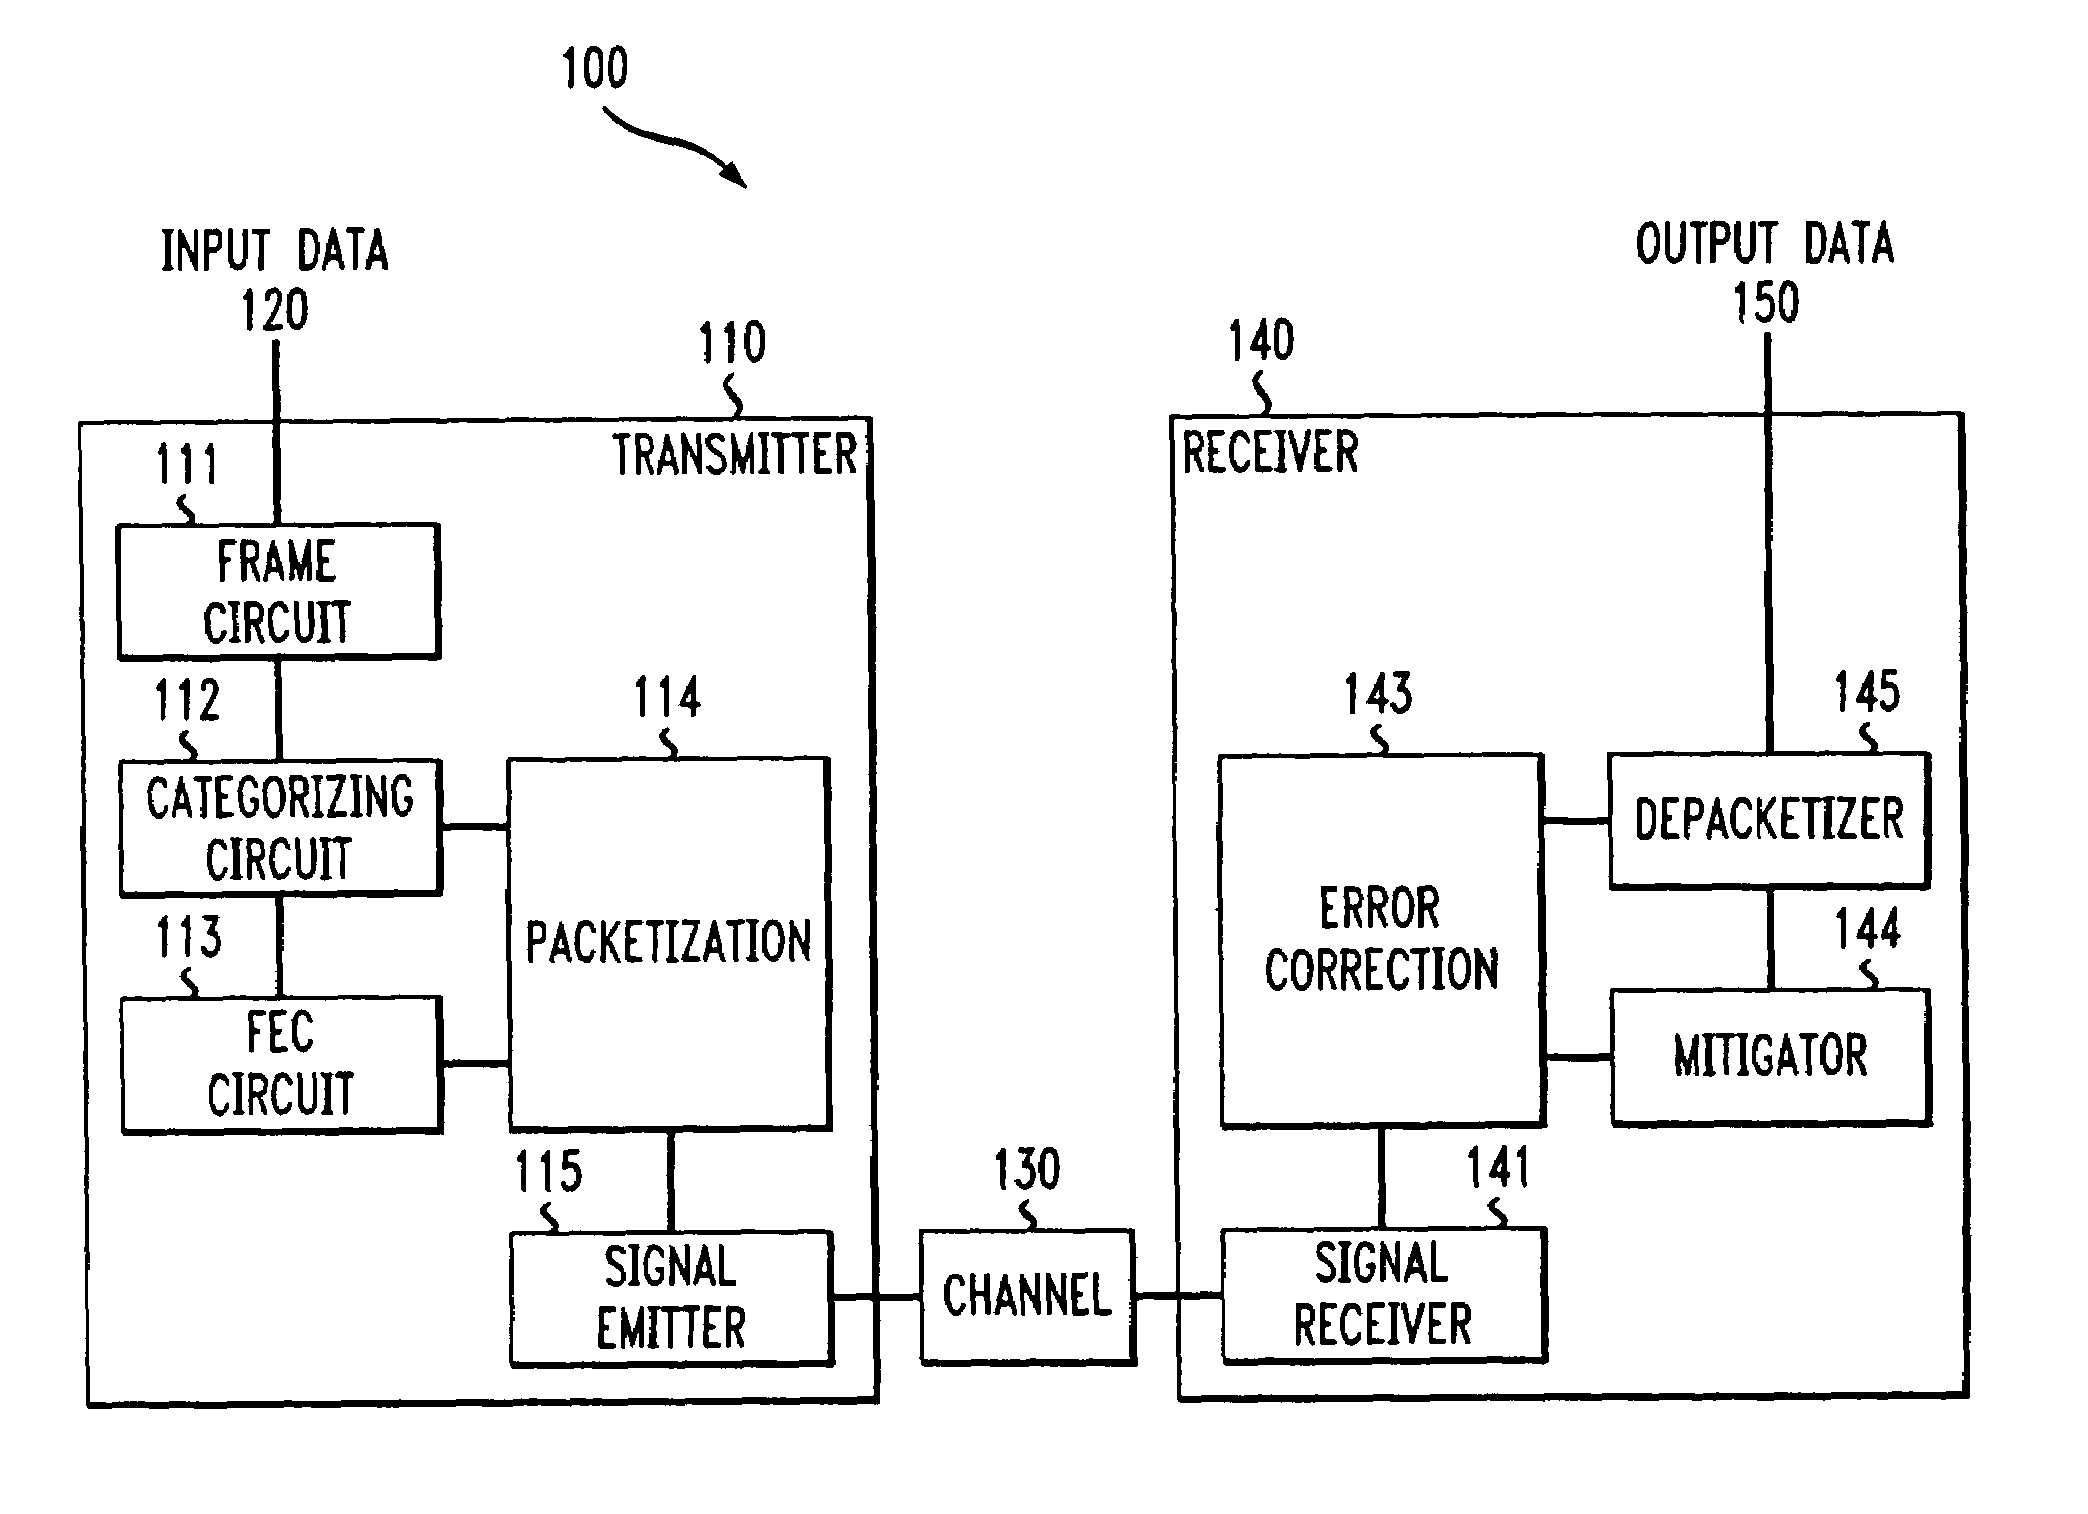 System and methods for transmitting data